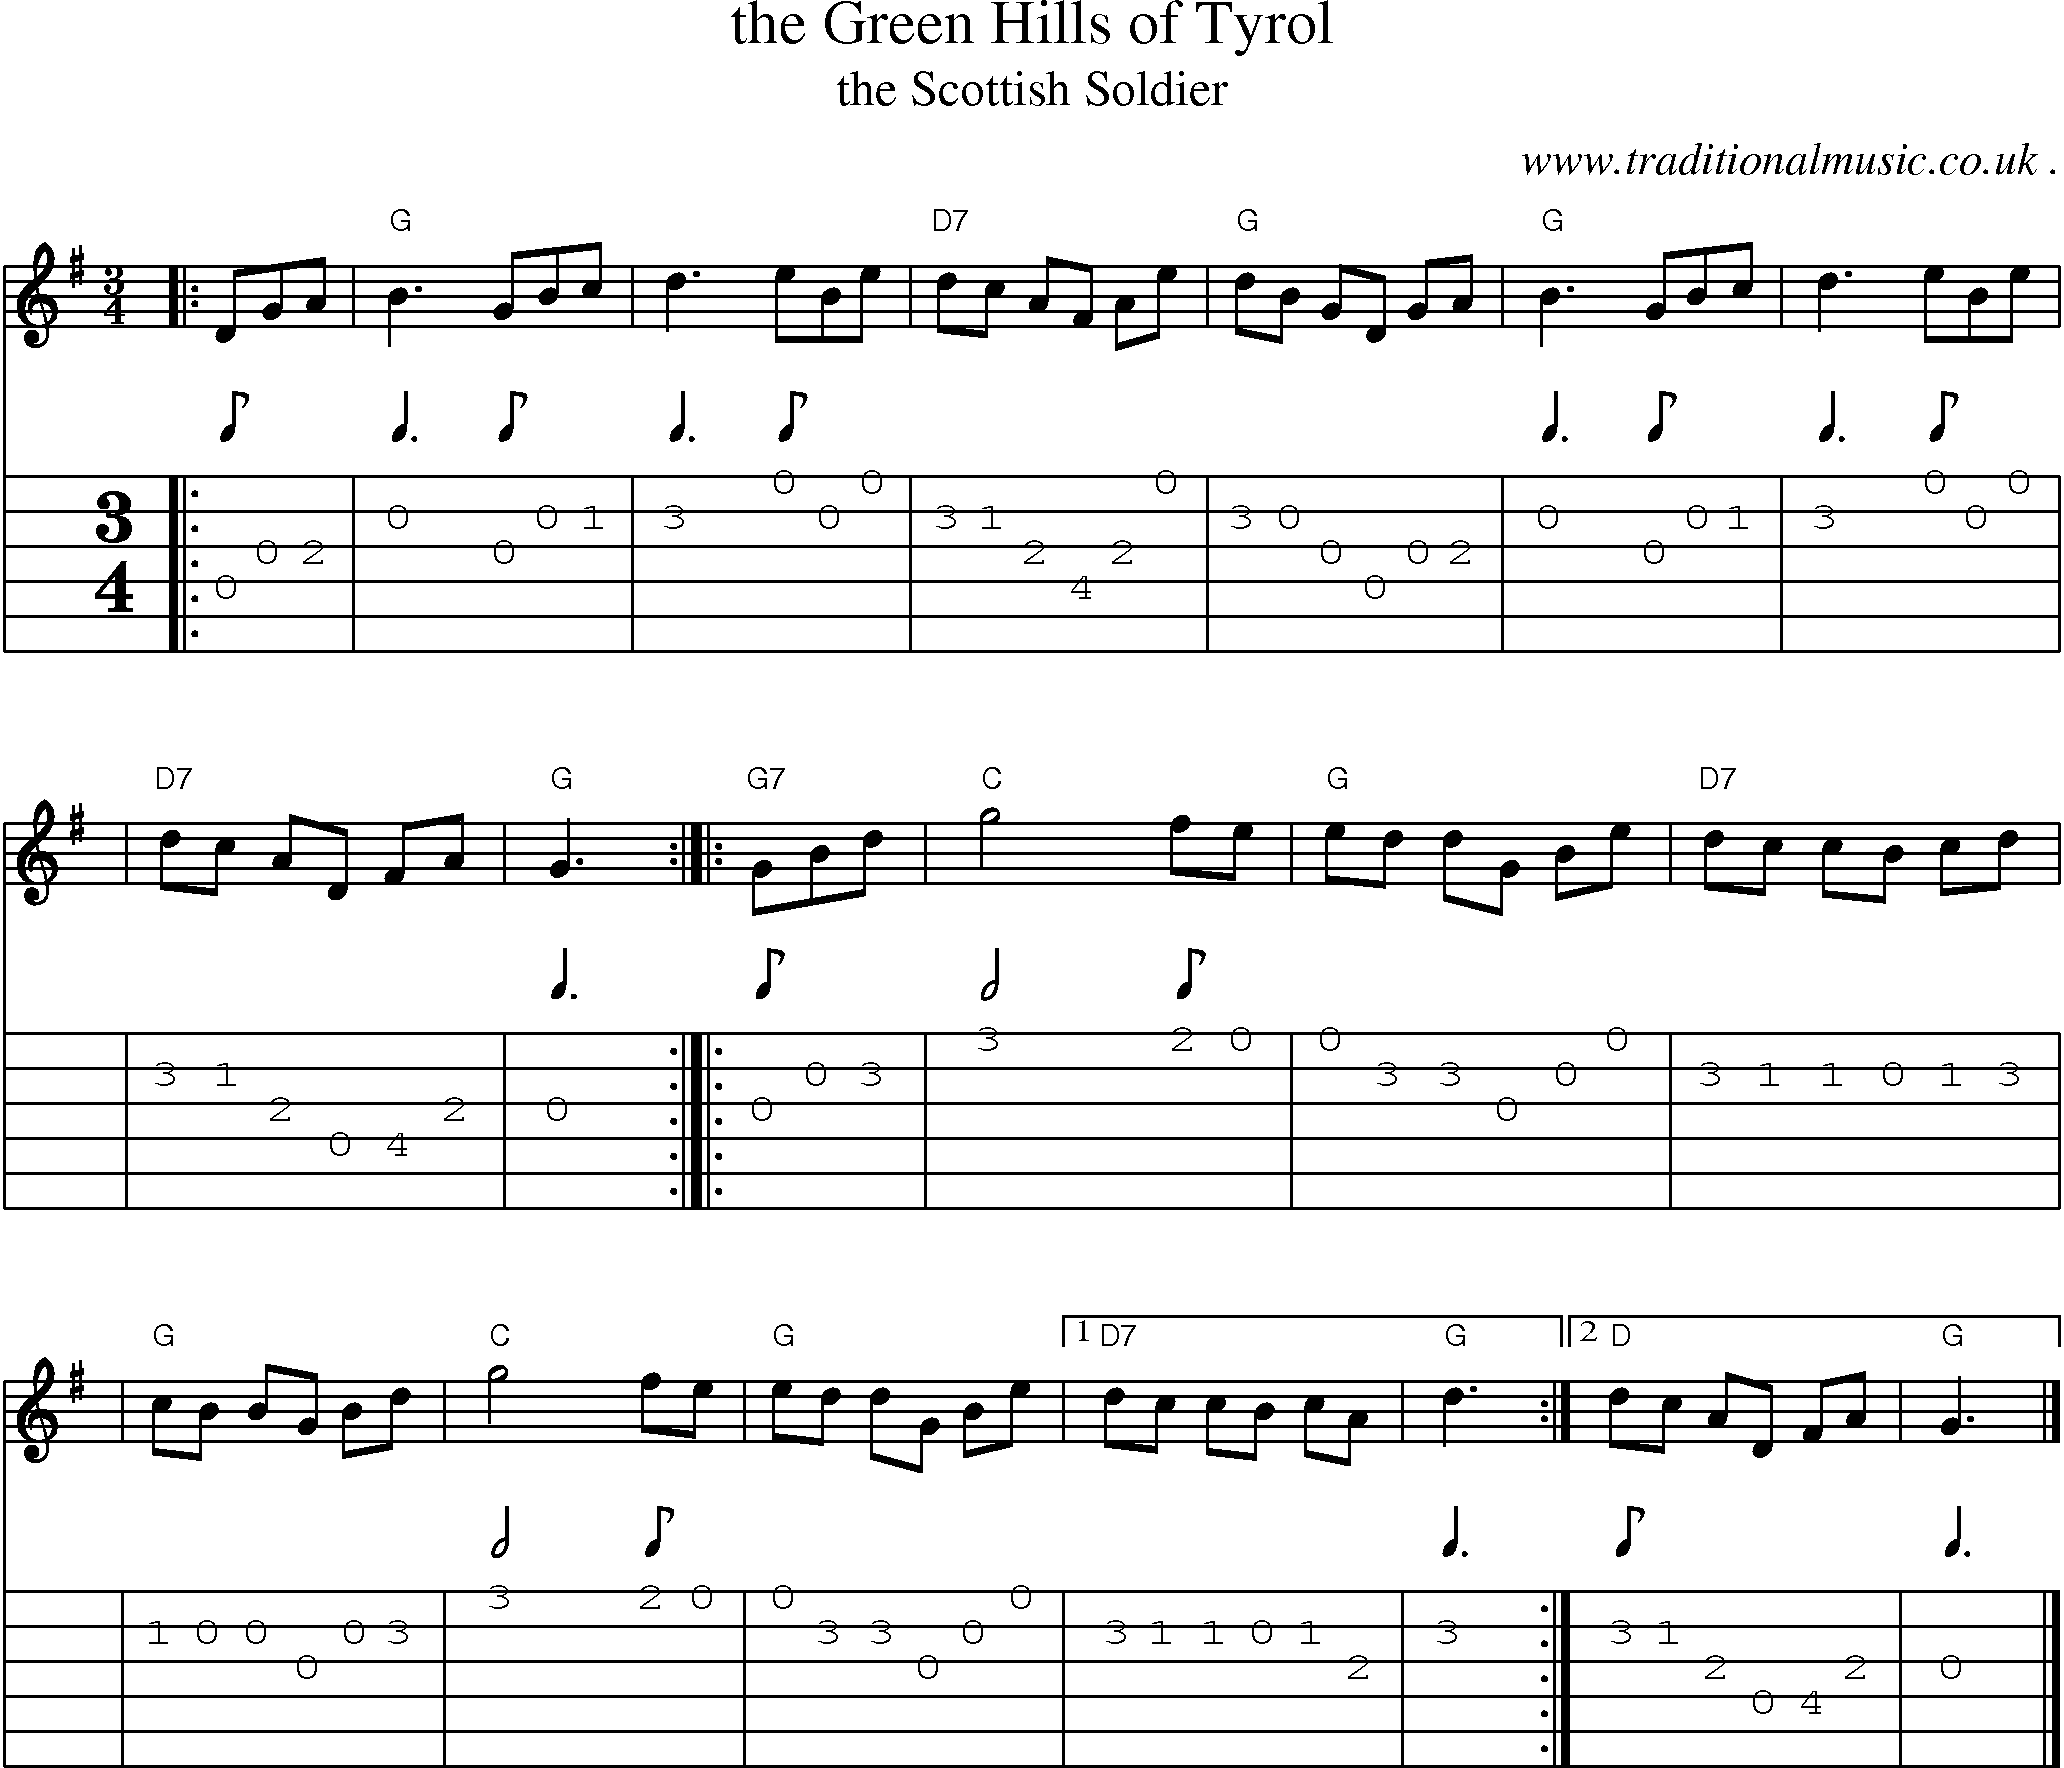 Sheet-music  score, Chords and Guitar Tabs for The Green Hills Of Tyrol